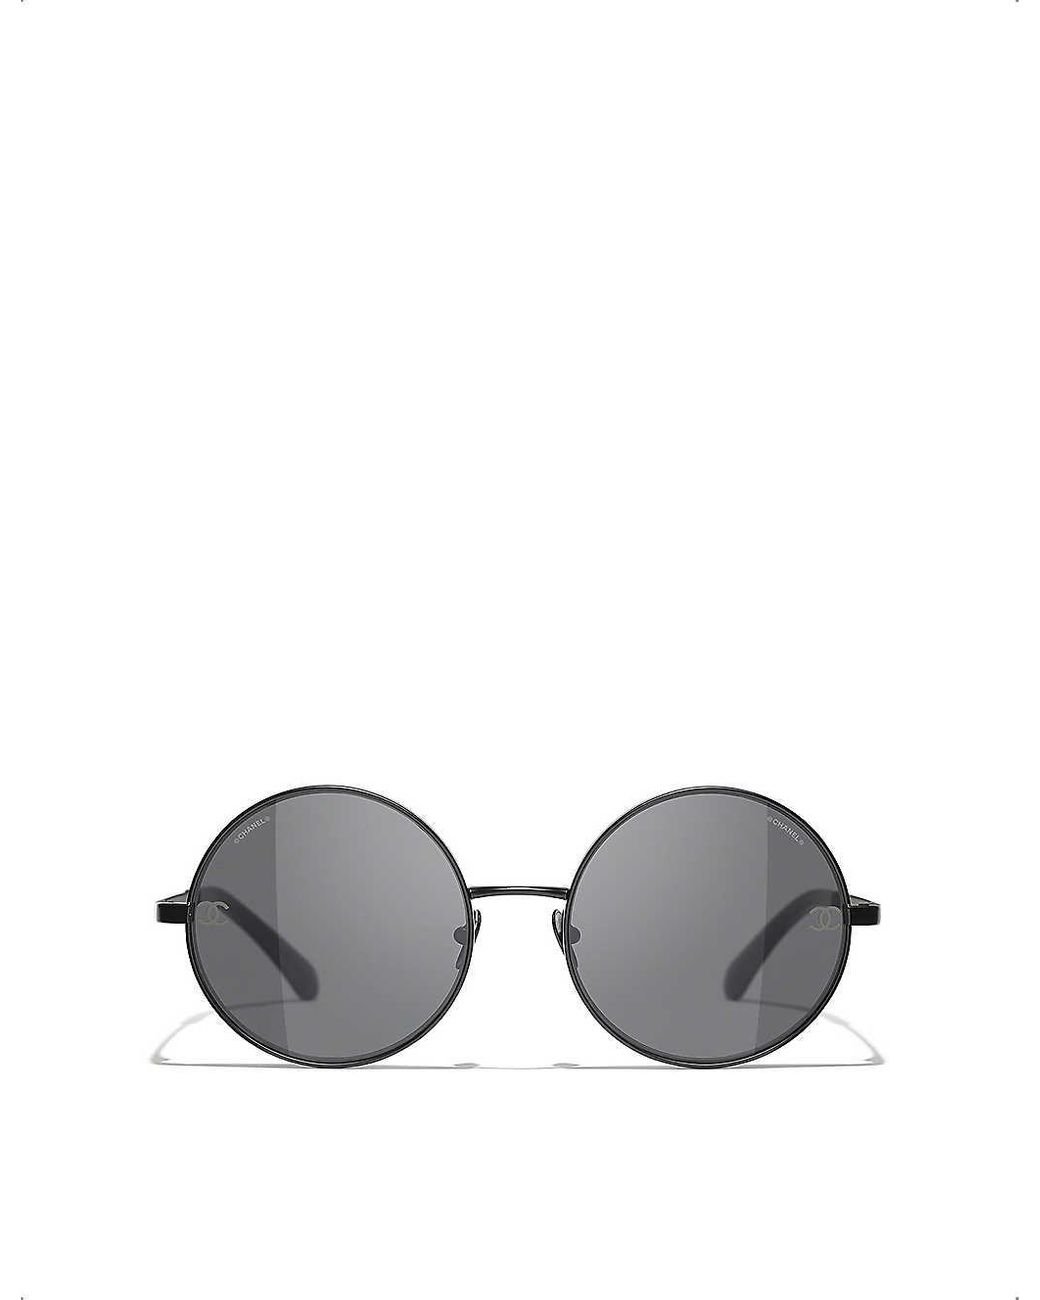 Chanel Round Frame Sunglasses in Black